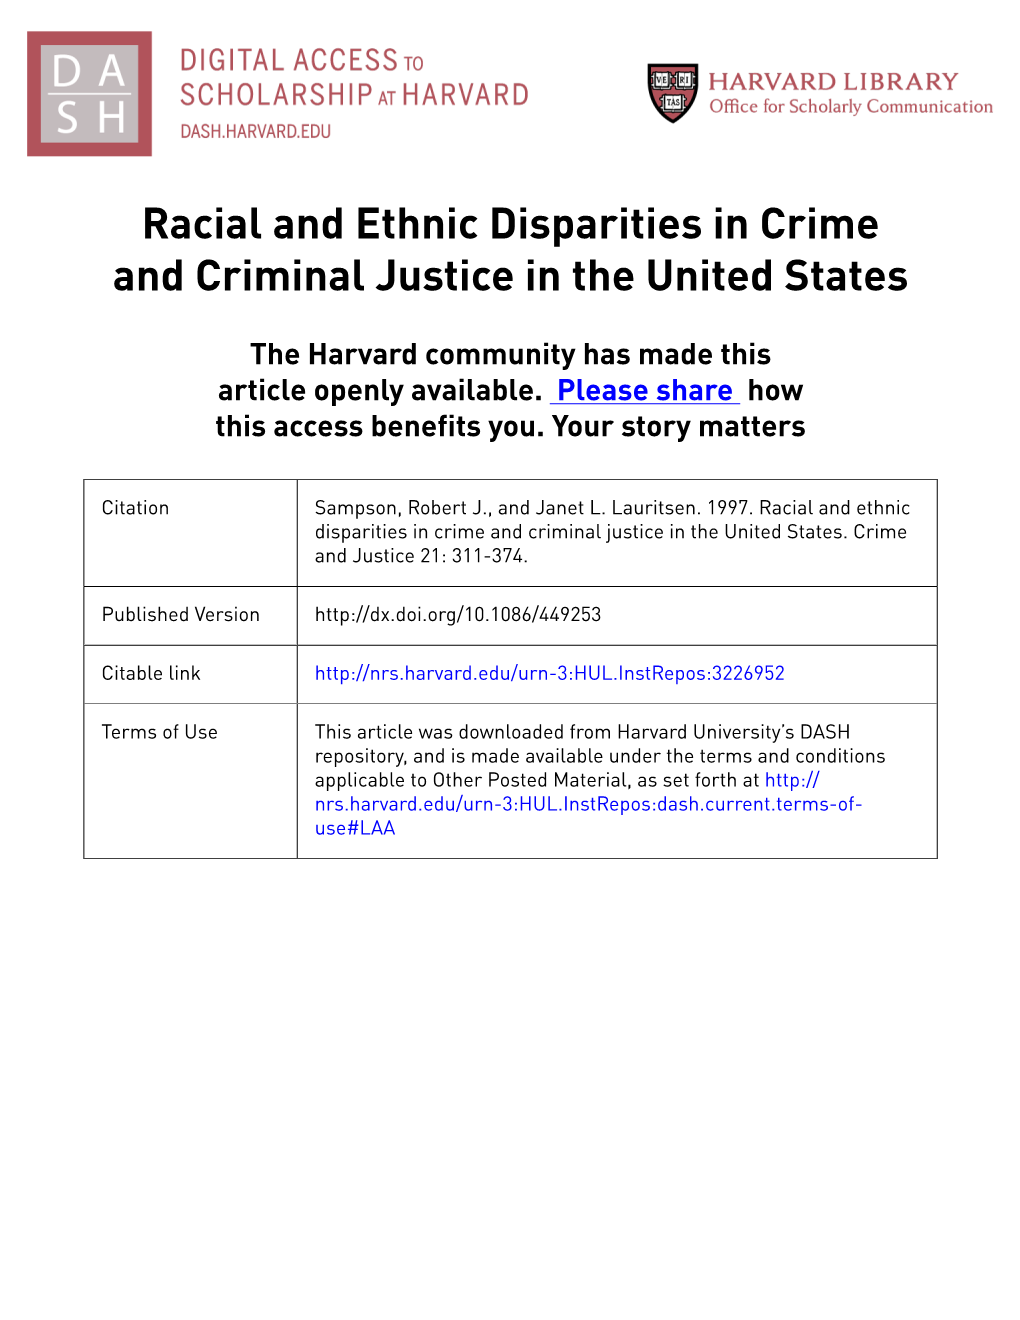 Racial and Ethnic Disparities in Crime and Criminal Justice in the United States